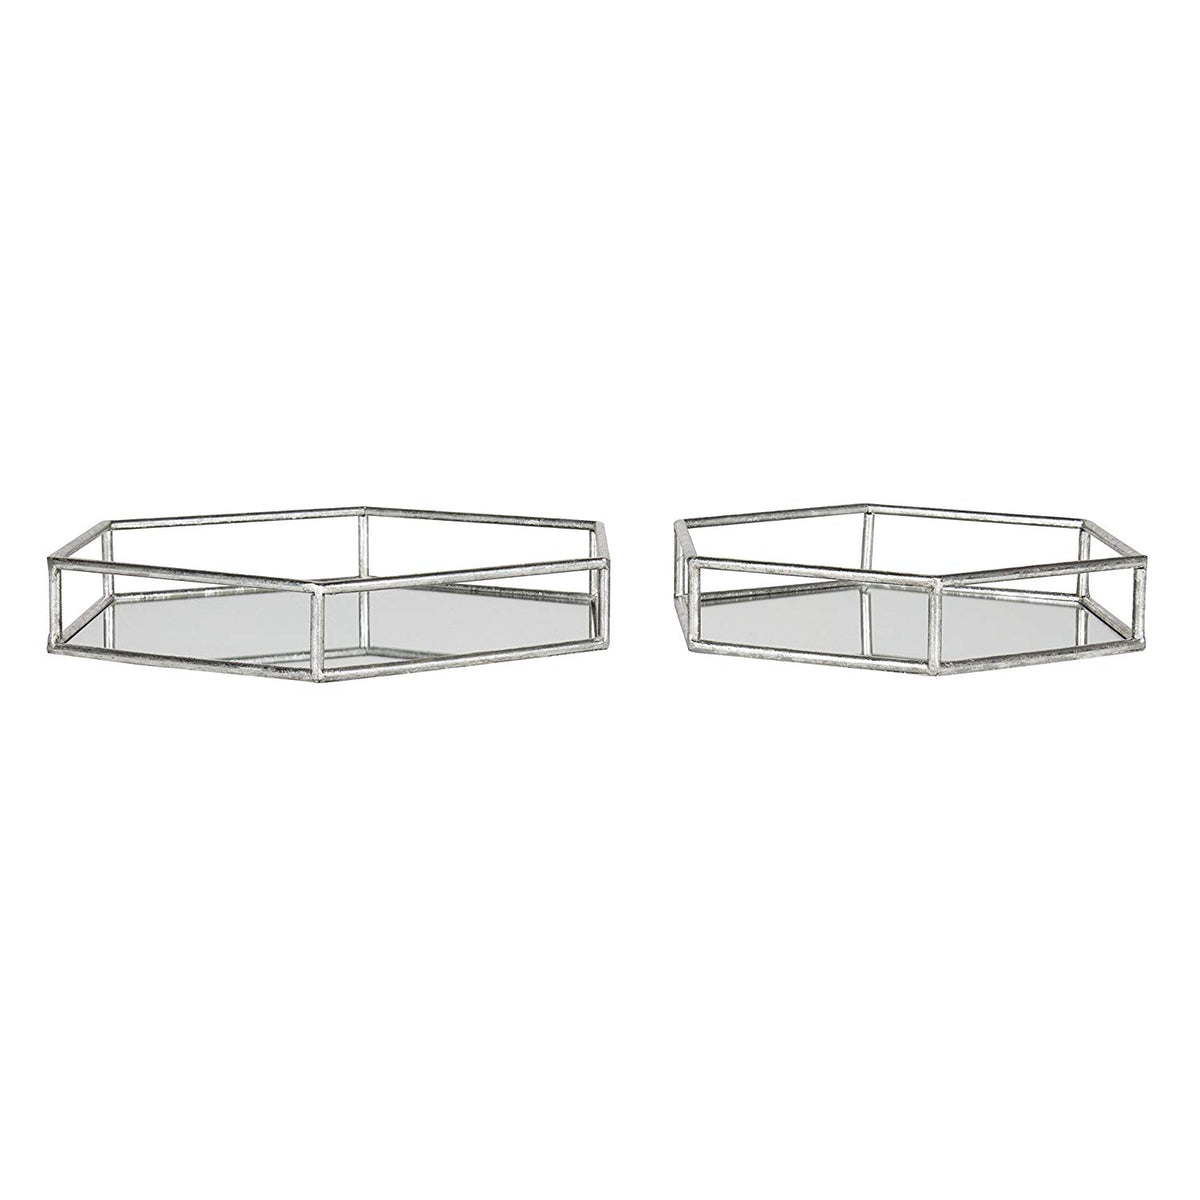 Mirrored Accent Trays (2 Piece Set) – slyinspireme